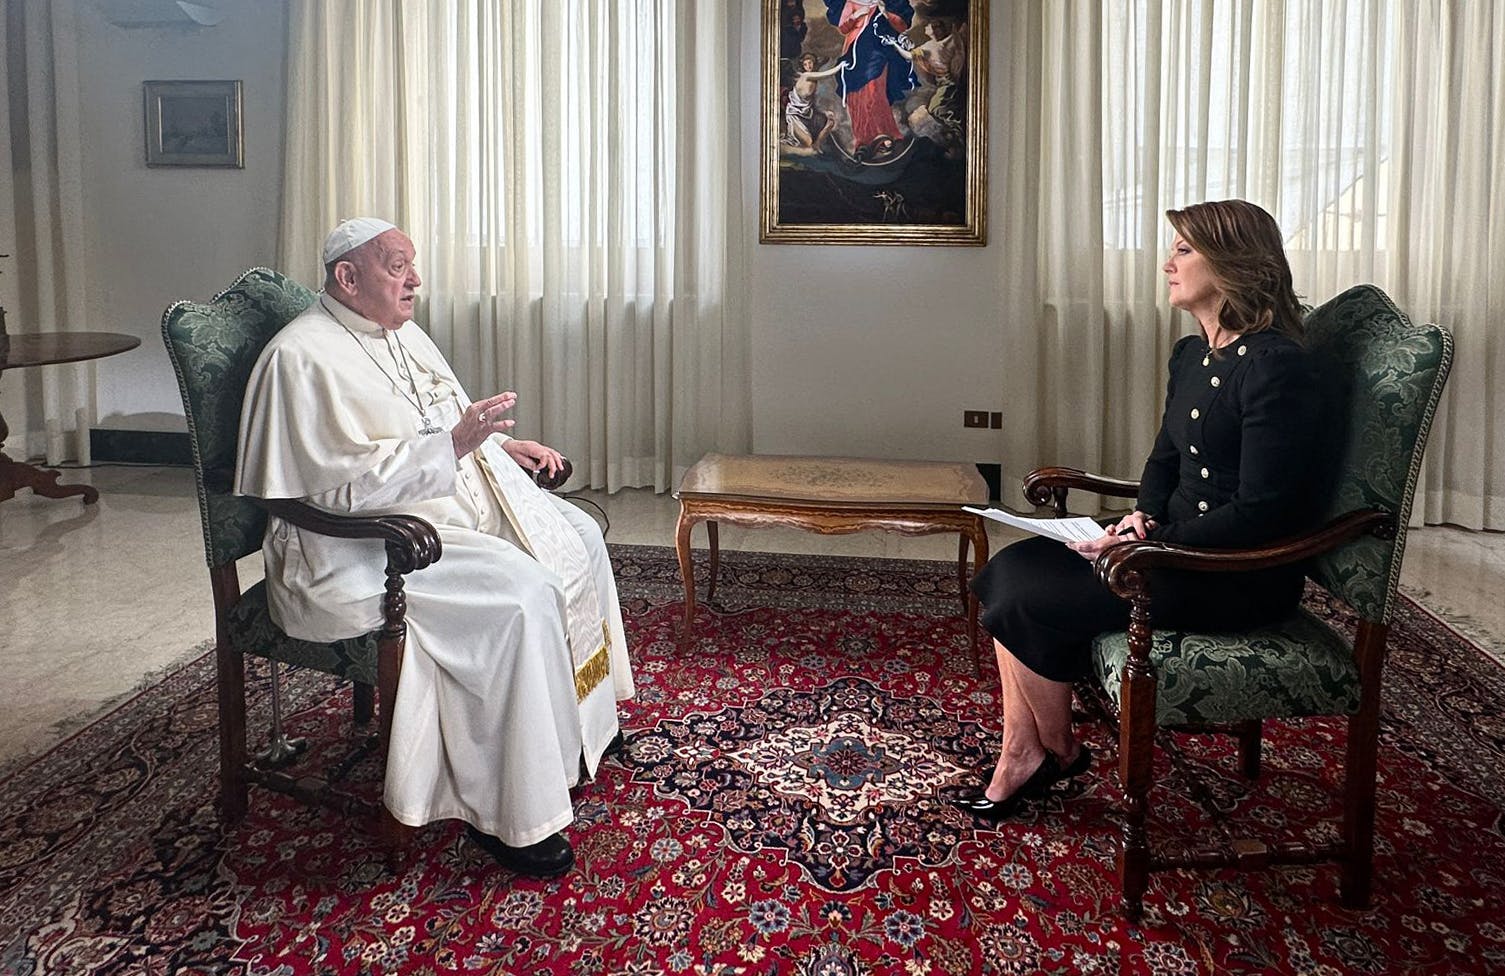 CBS News Exclusive: Norah O’Donnell interviews Pope Francis in Rome